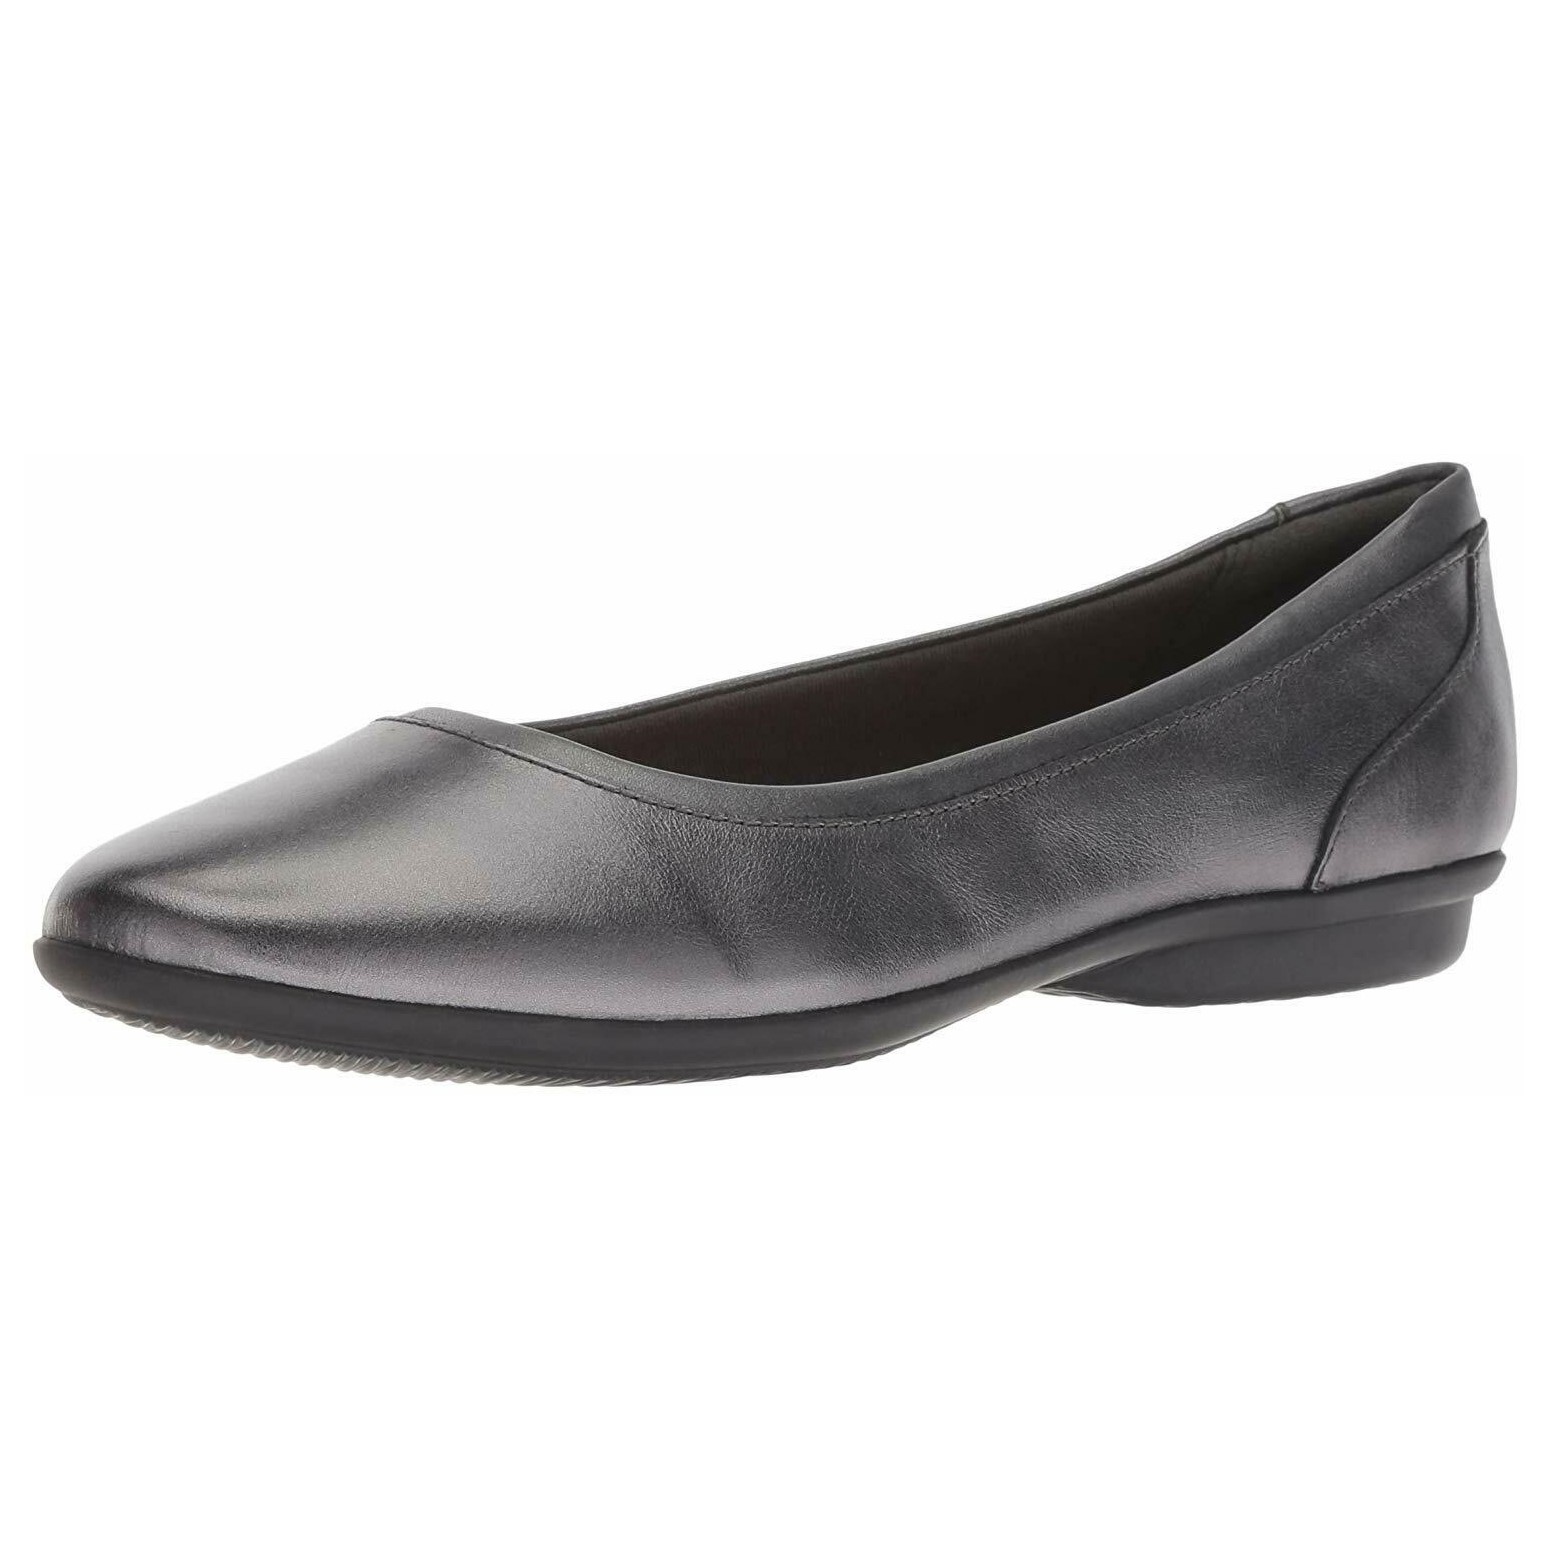 clarks pewter flats